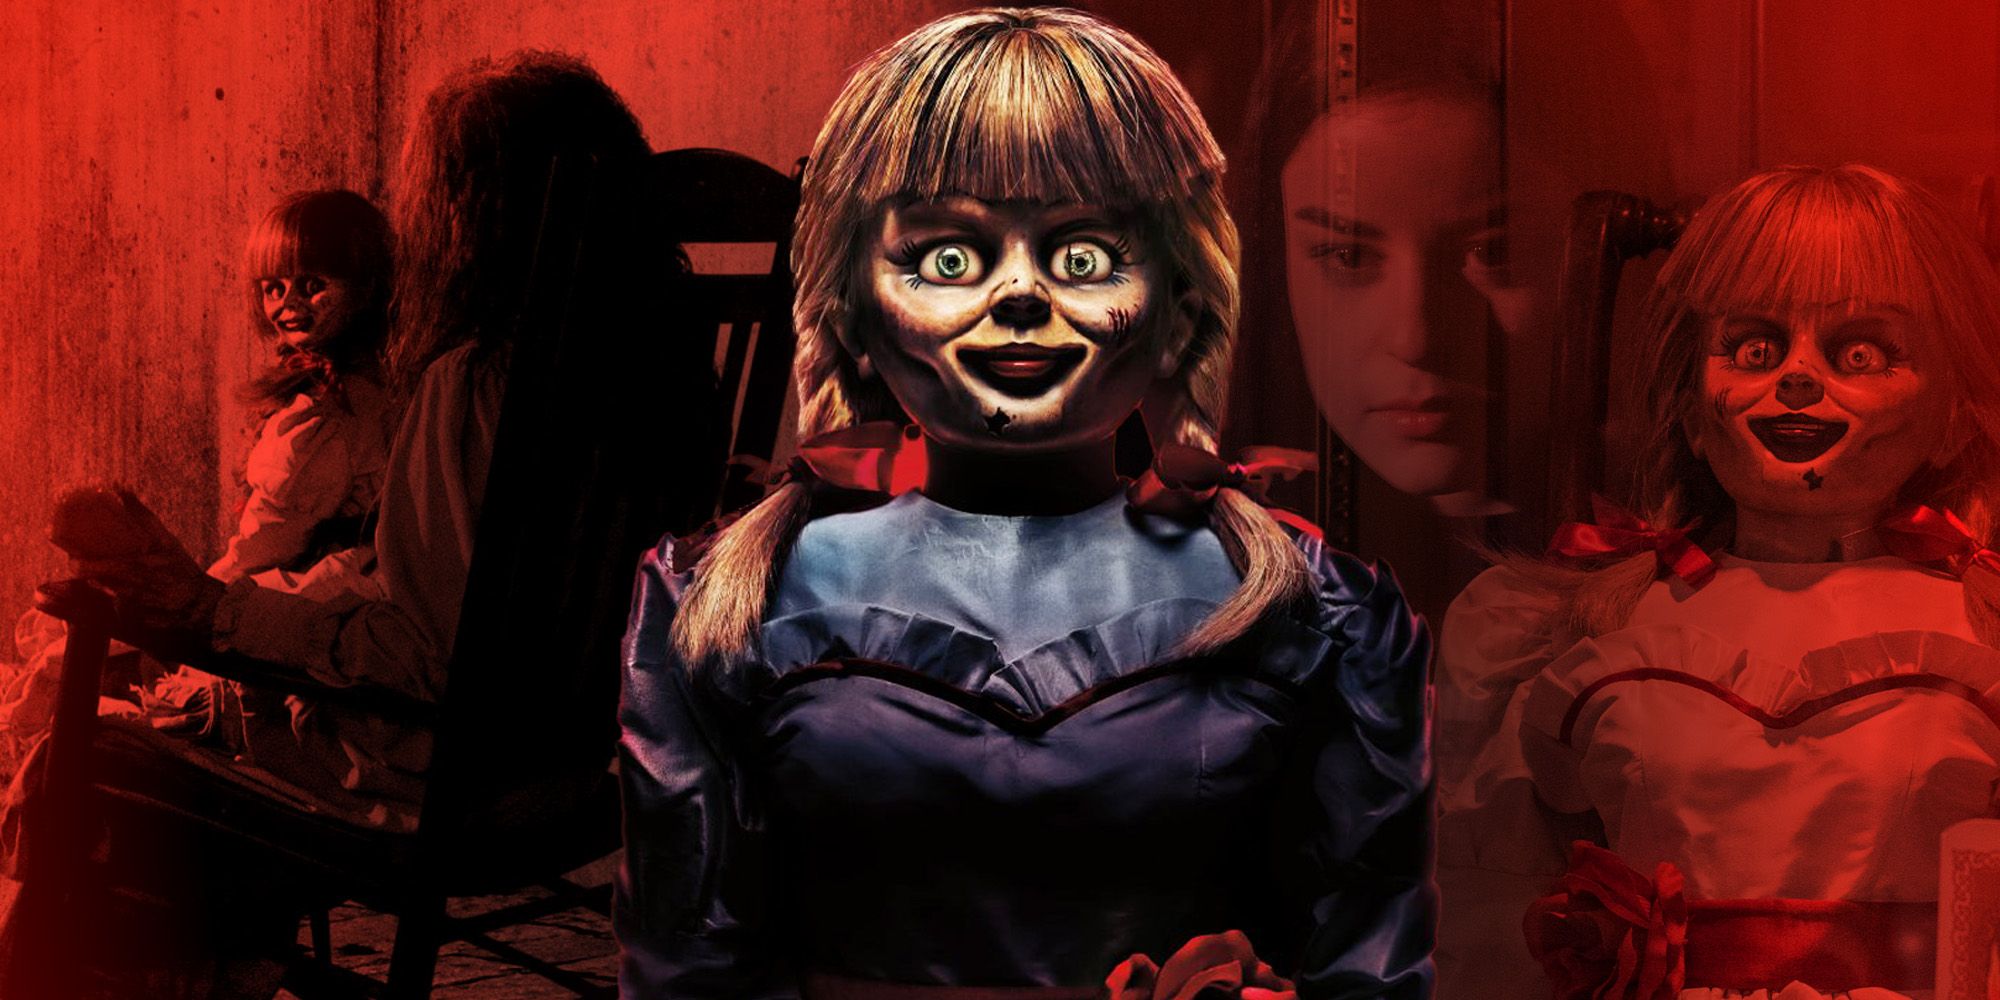 The Annabelle doll from the Conjuring Universe